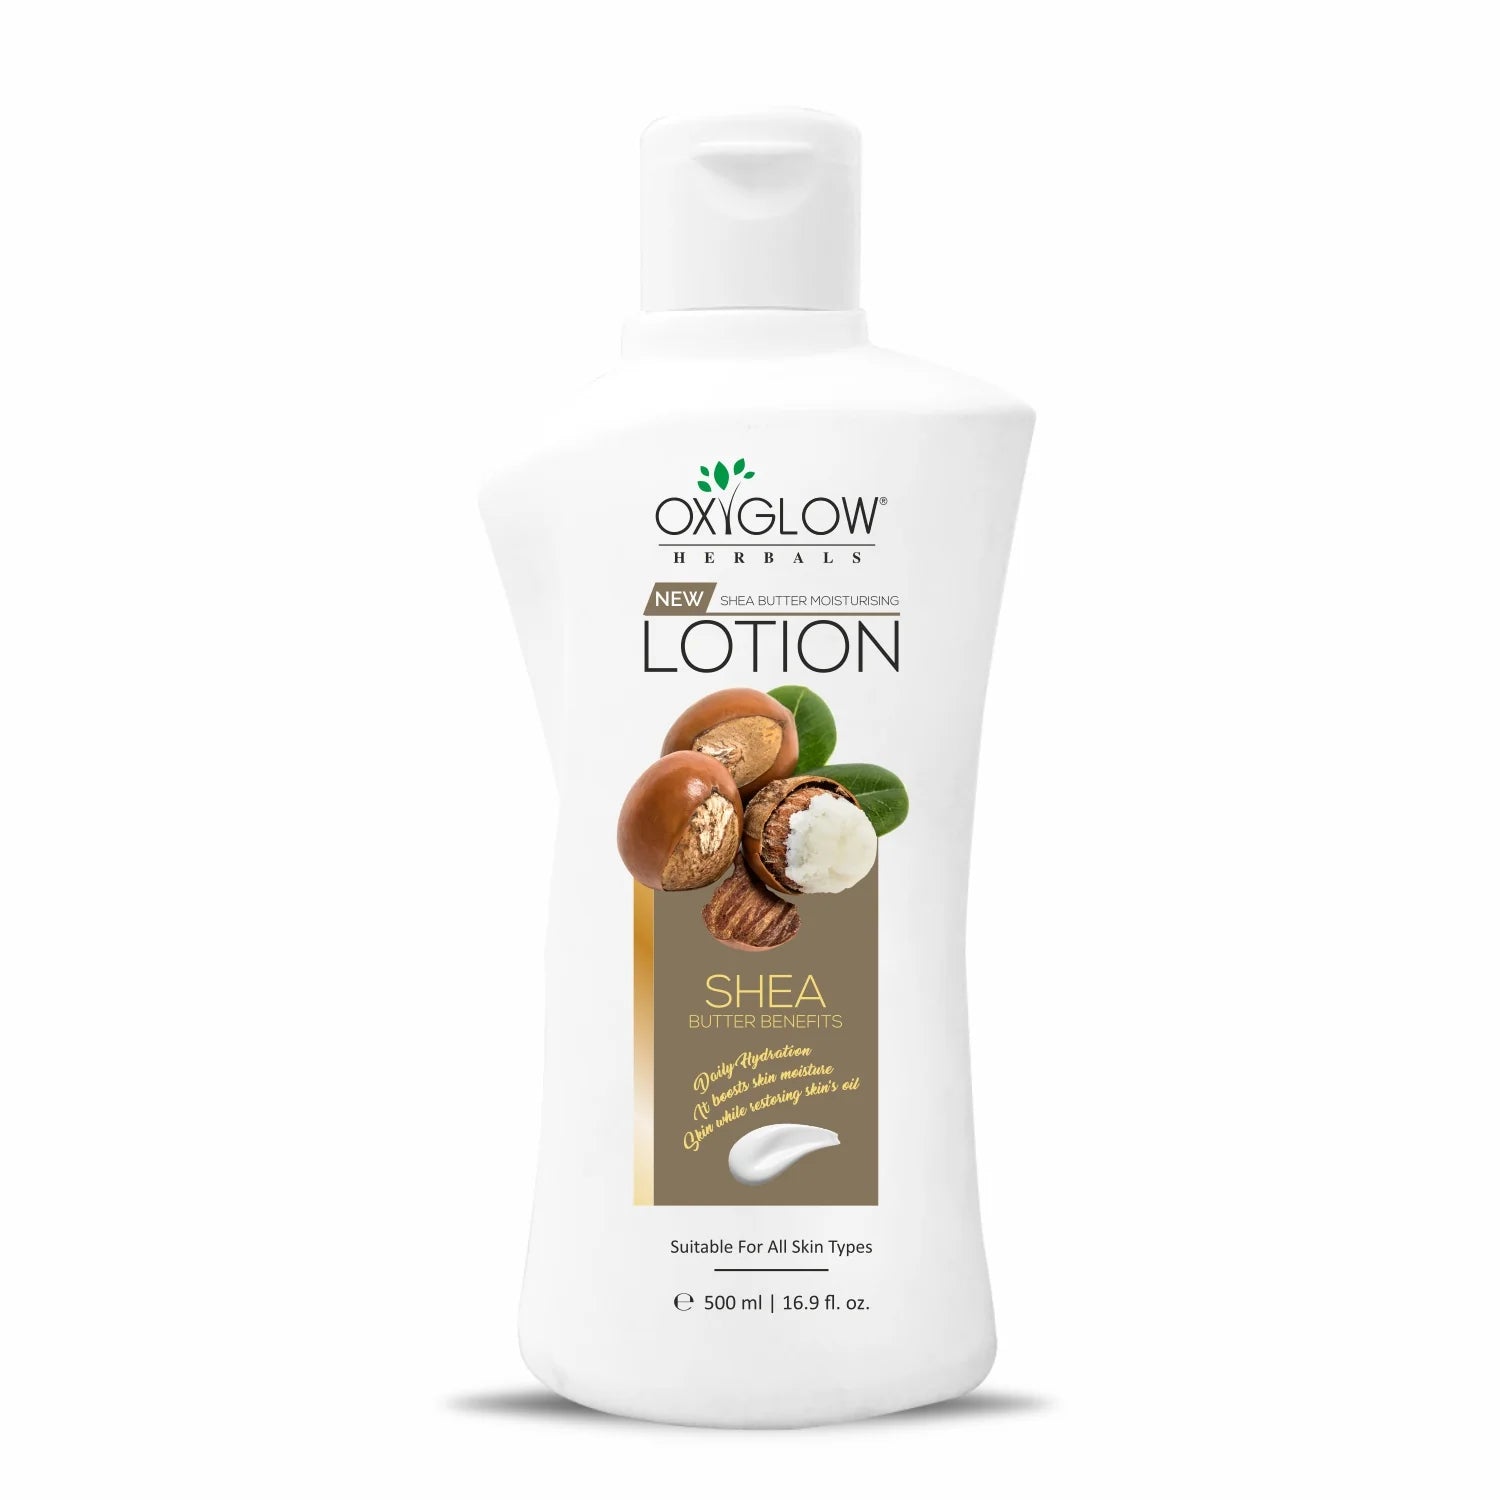 Buy Online Oxyglow Herbals New Shea Butter Moisturising Lotion - 500 ml | Suitable For All Skin Types at best Prize in India